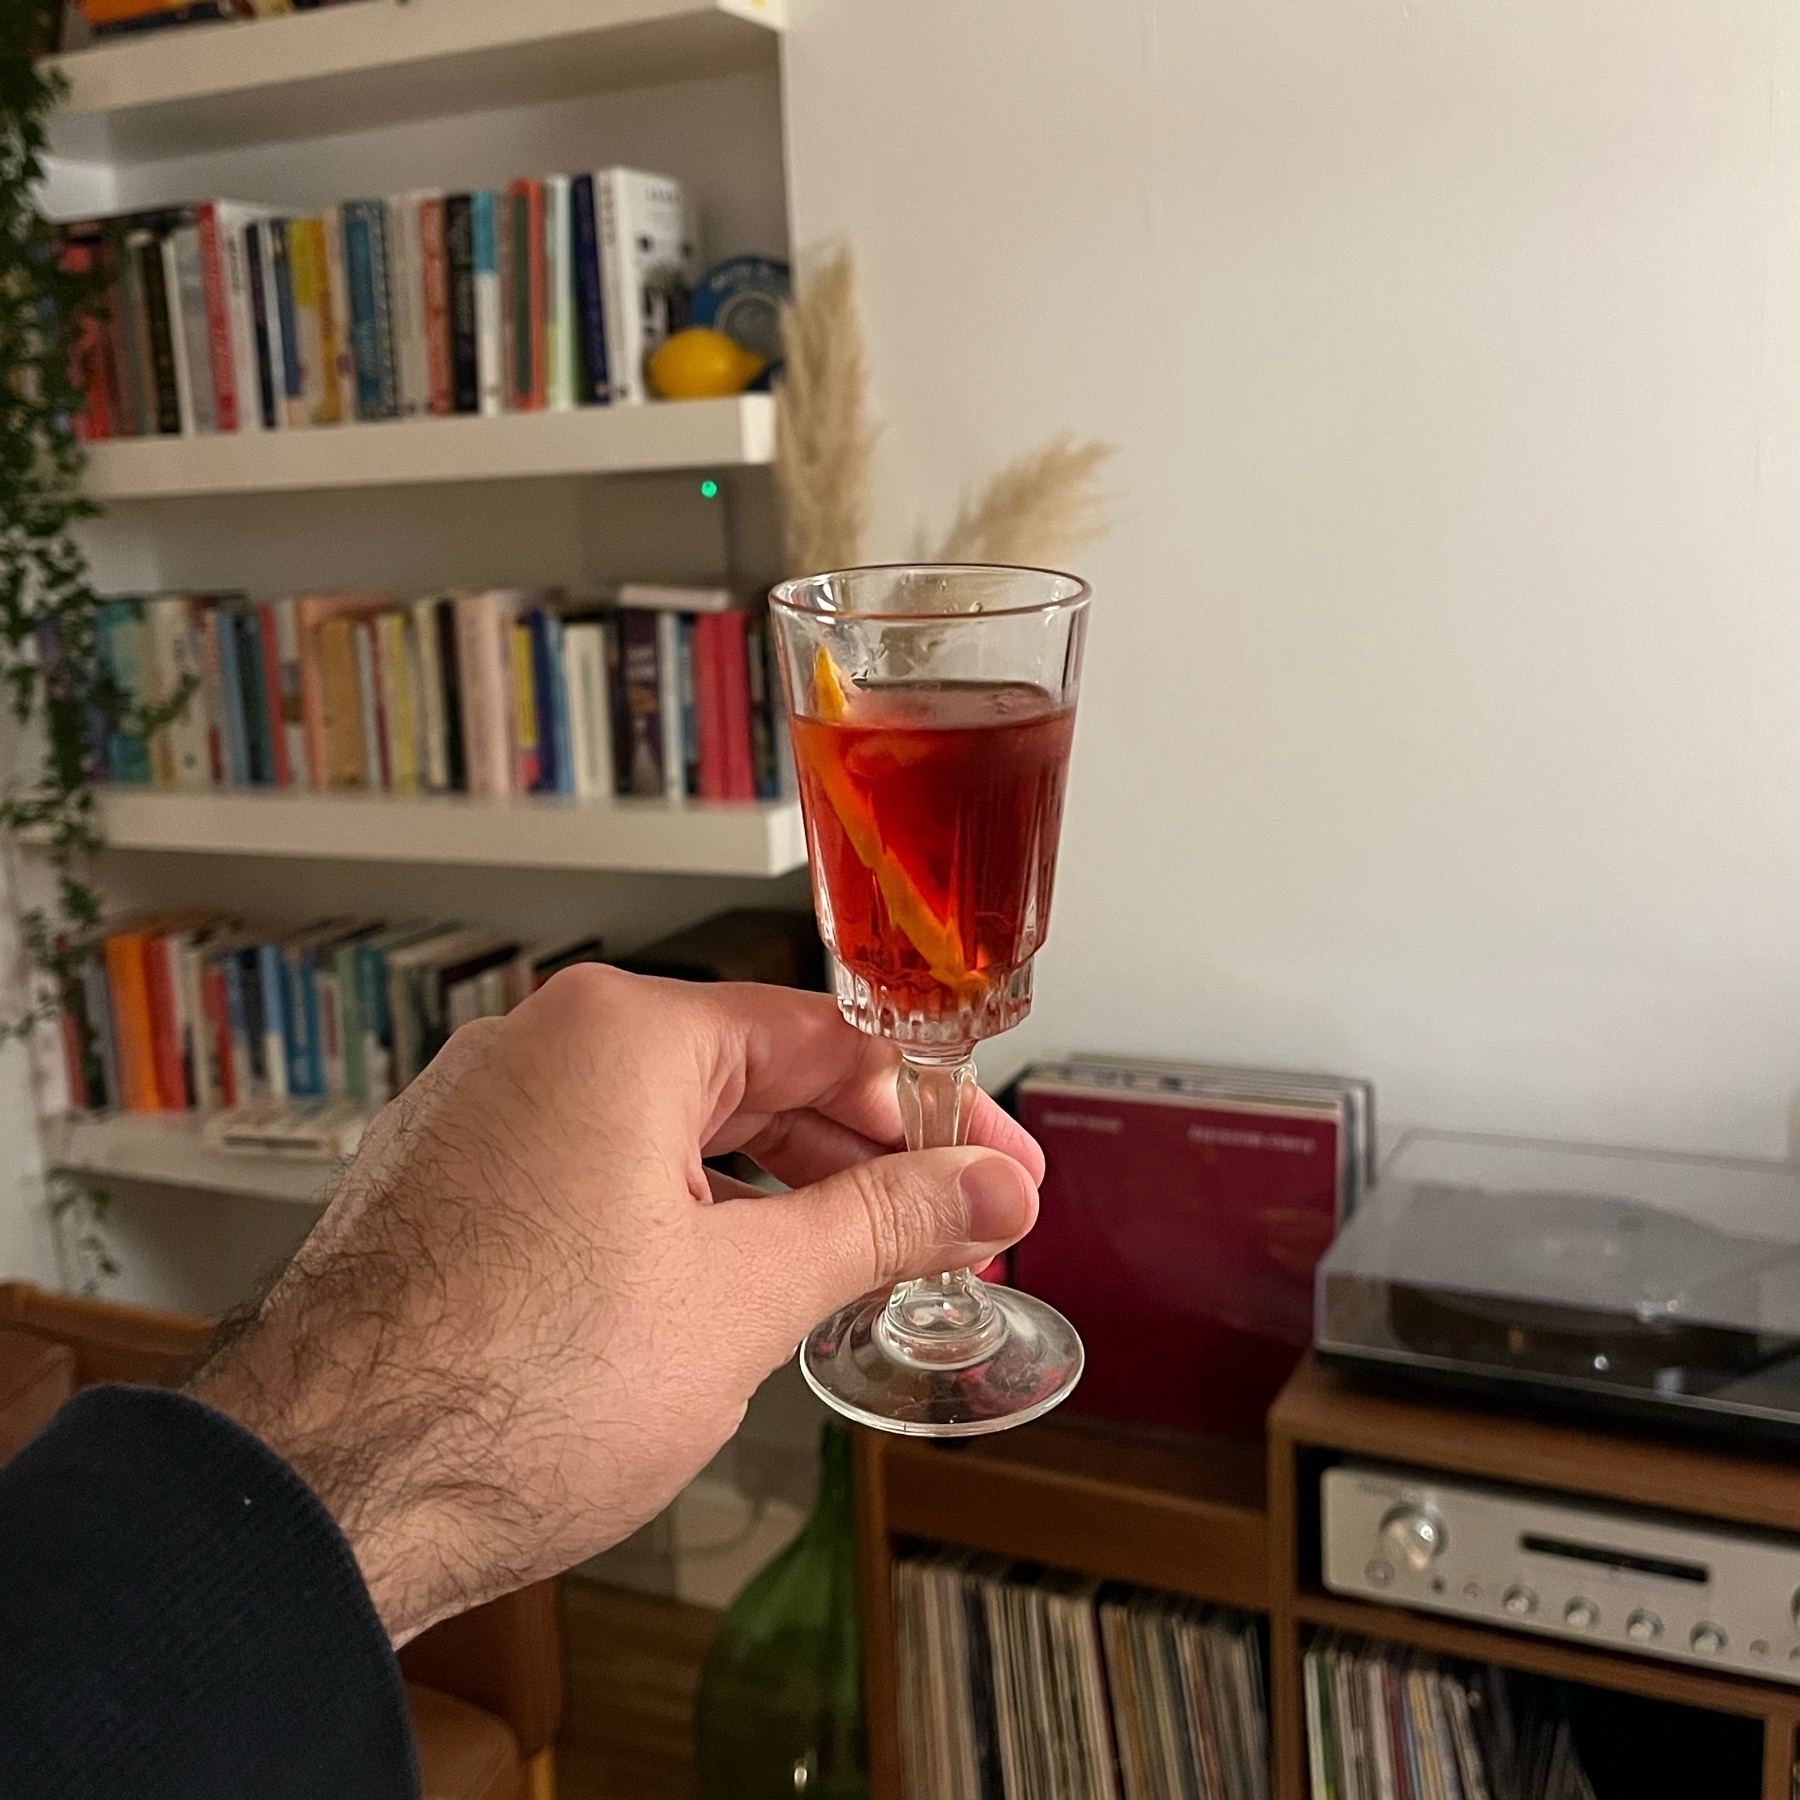 Negroni on a small glass hold up to a white wall